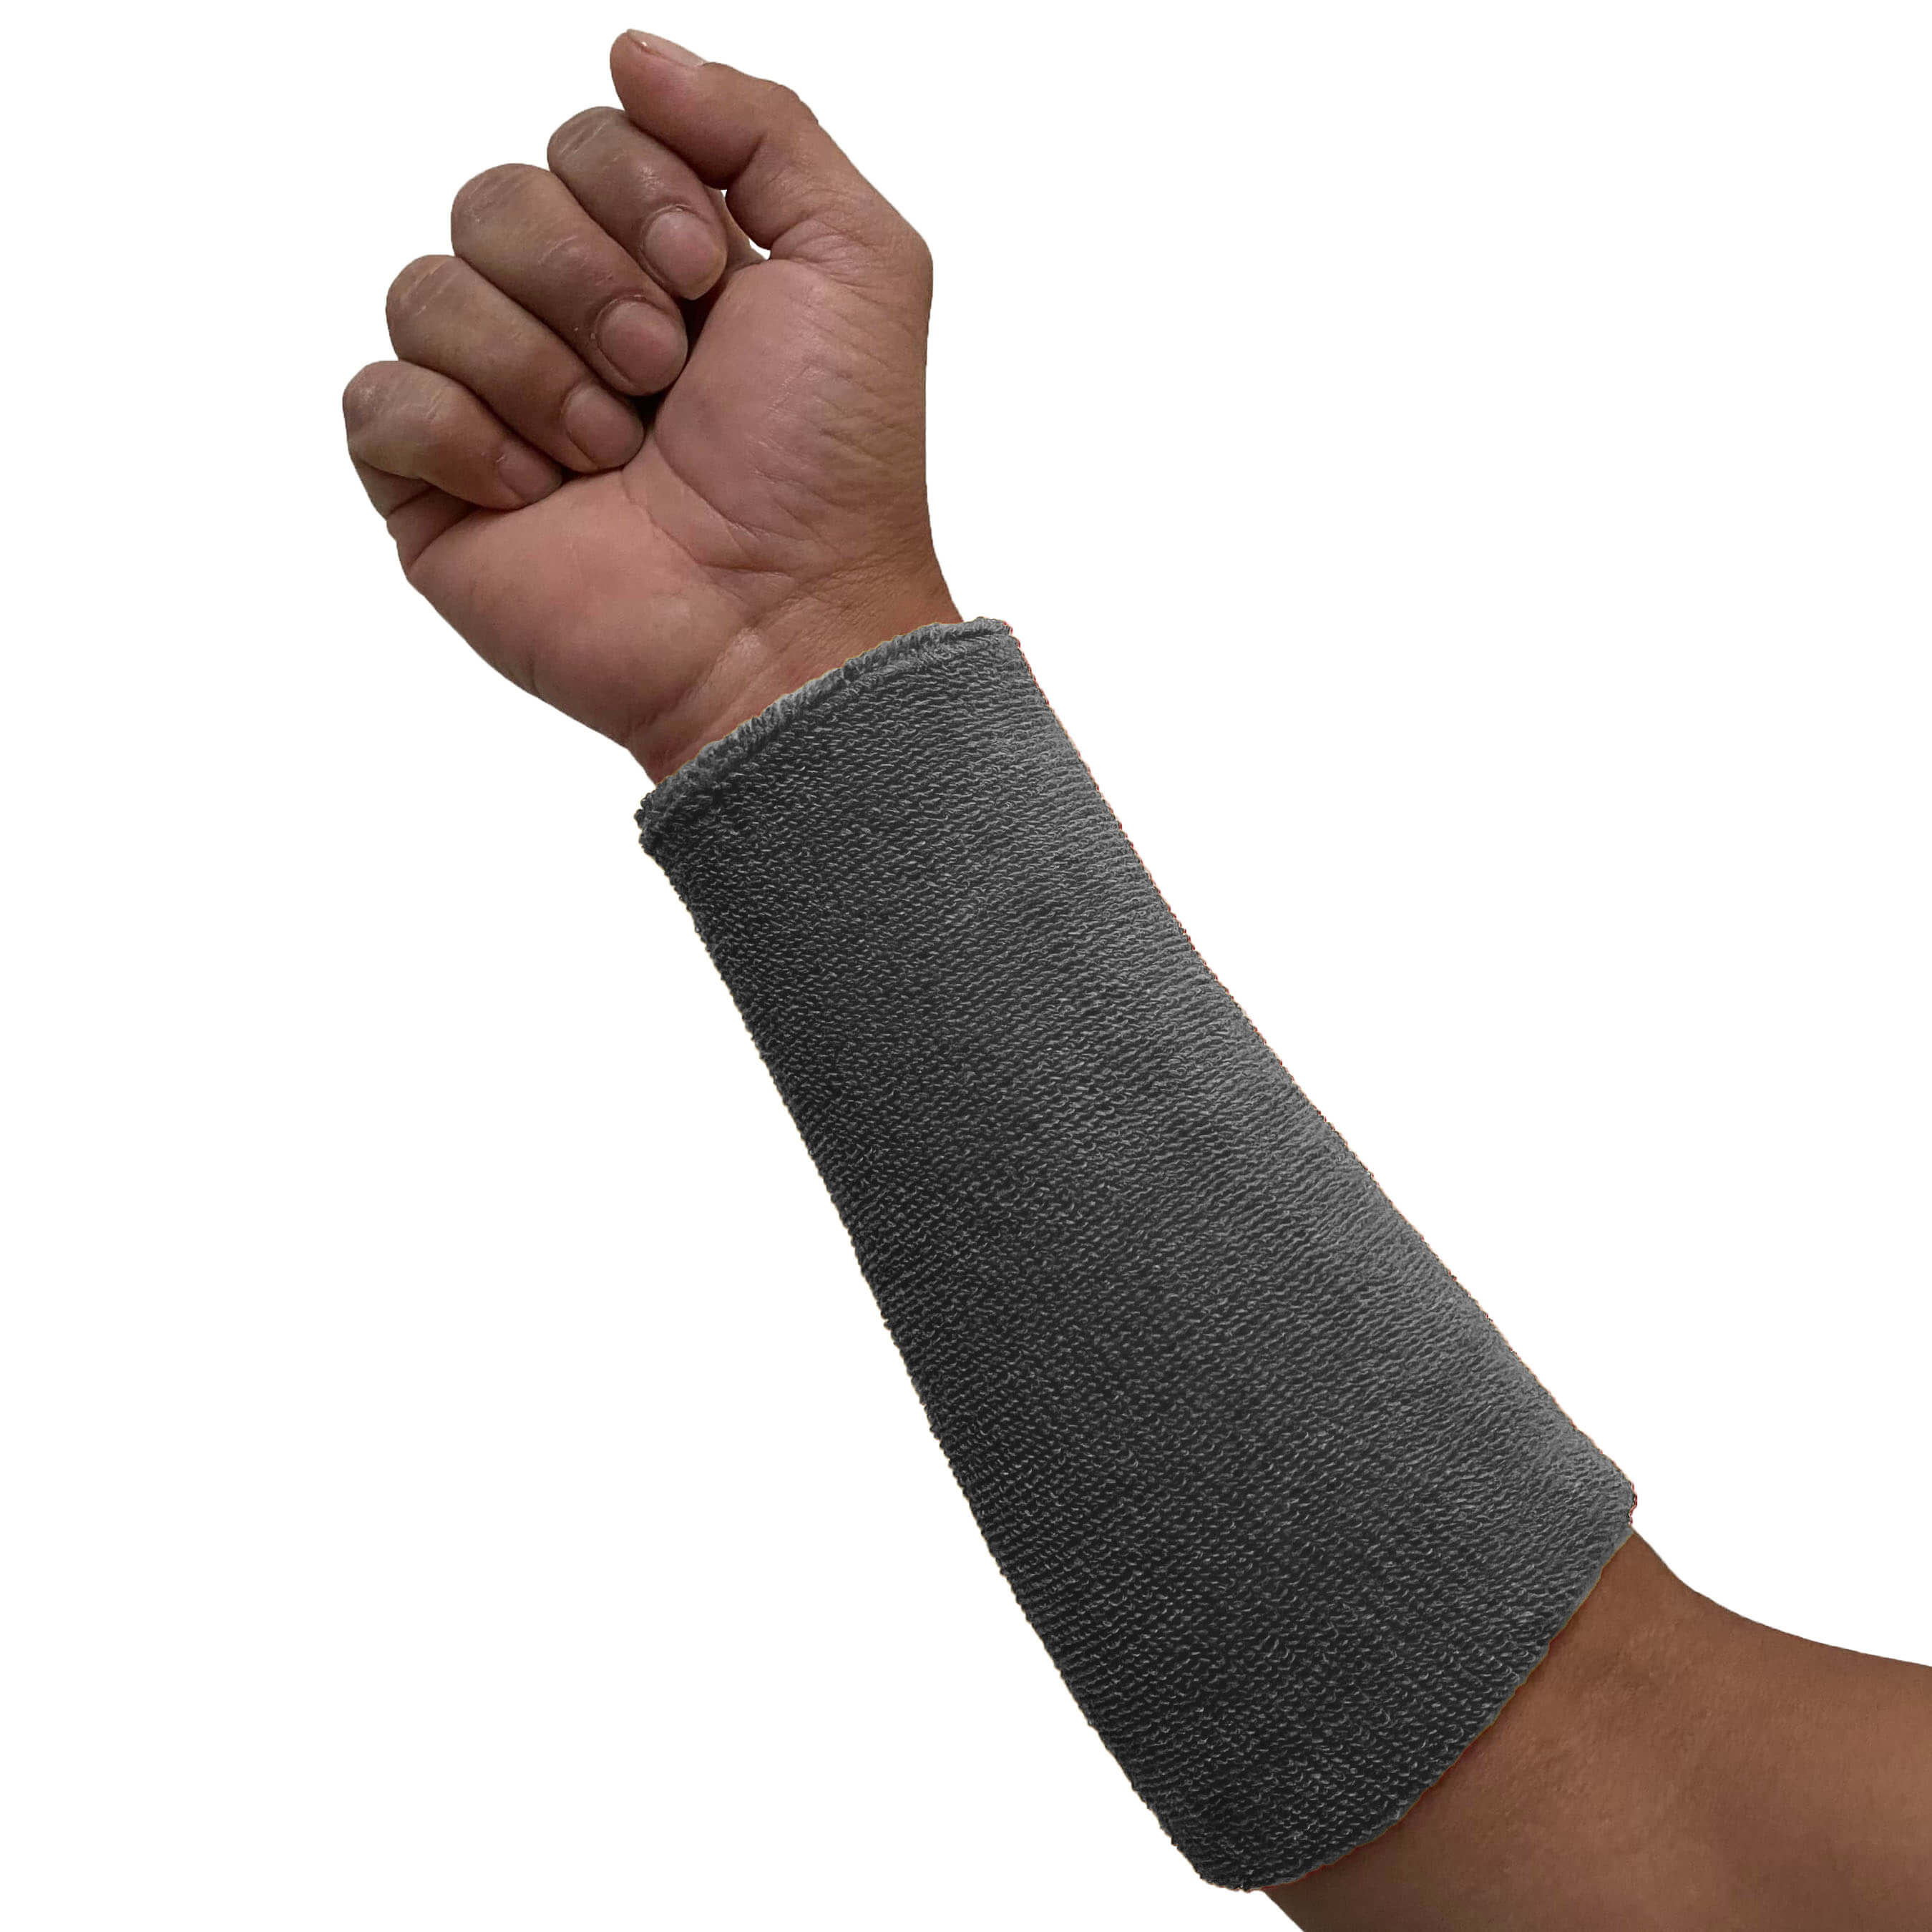 9 inch Long COUVER Charcoal Gray Thick Athletic Wristbands 3 Pair Pack